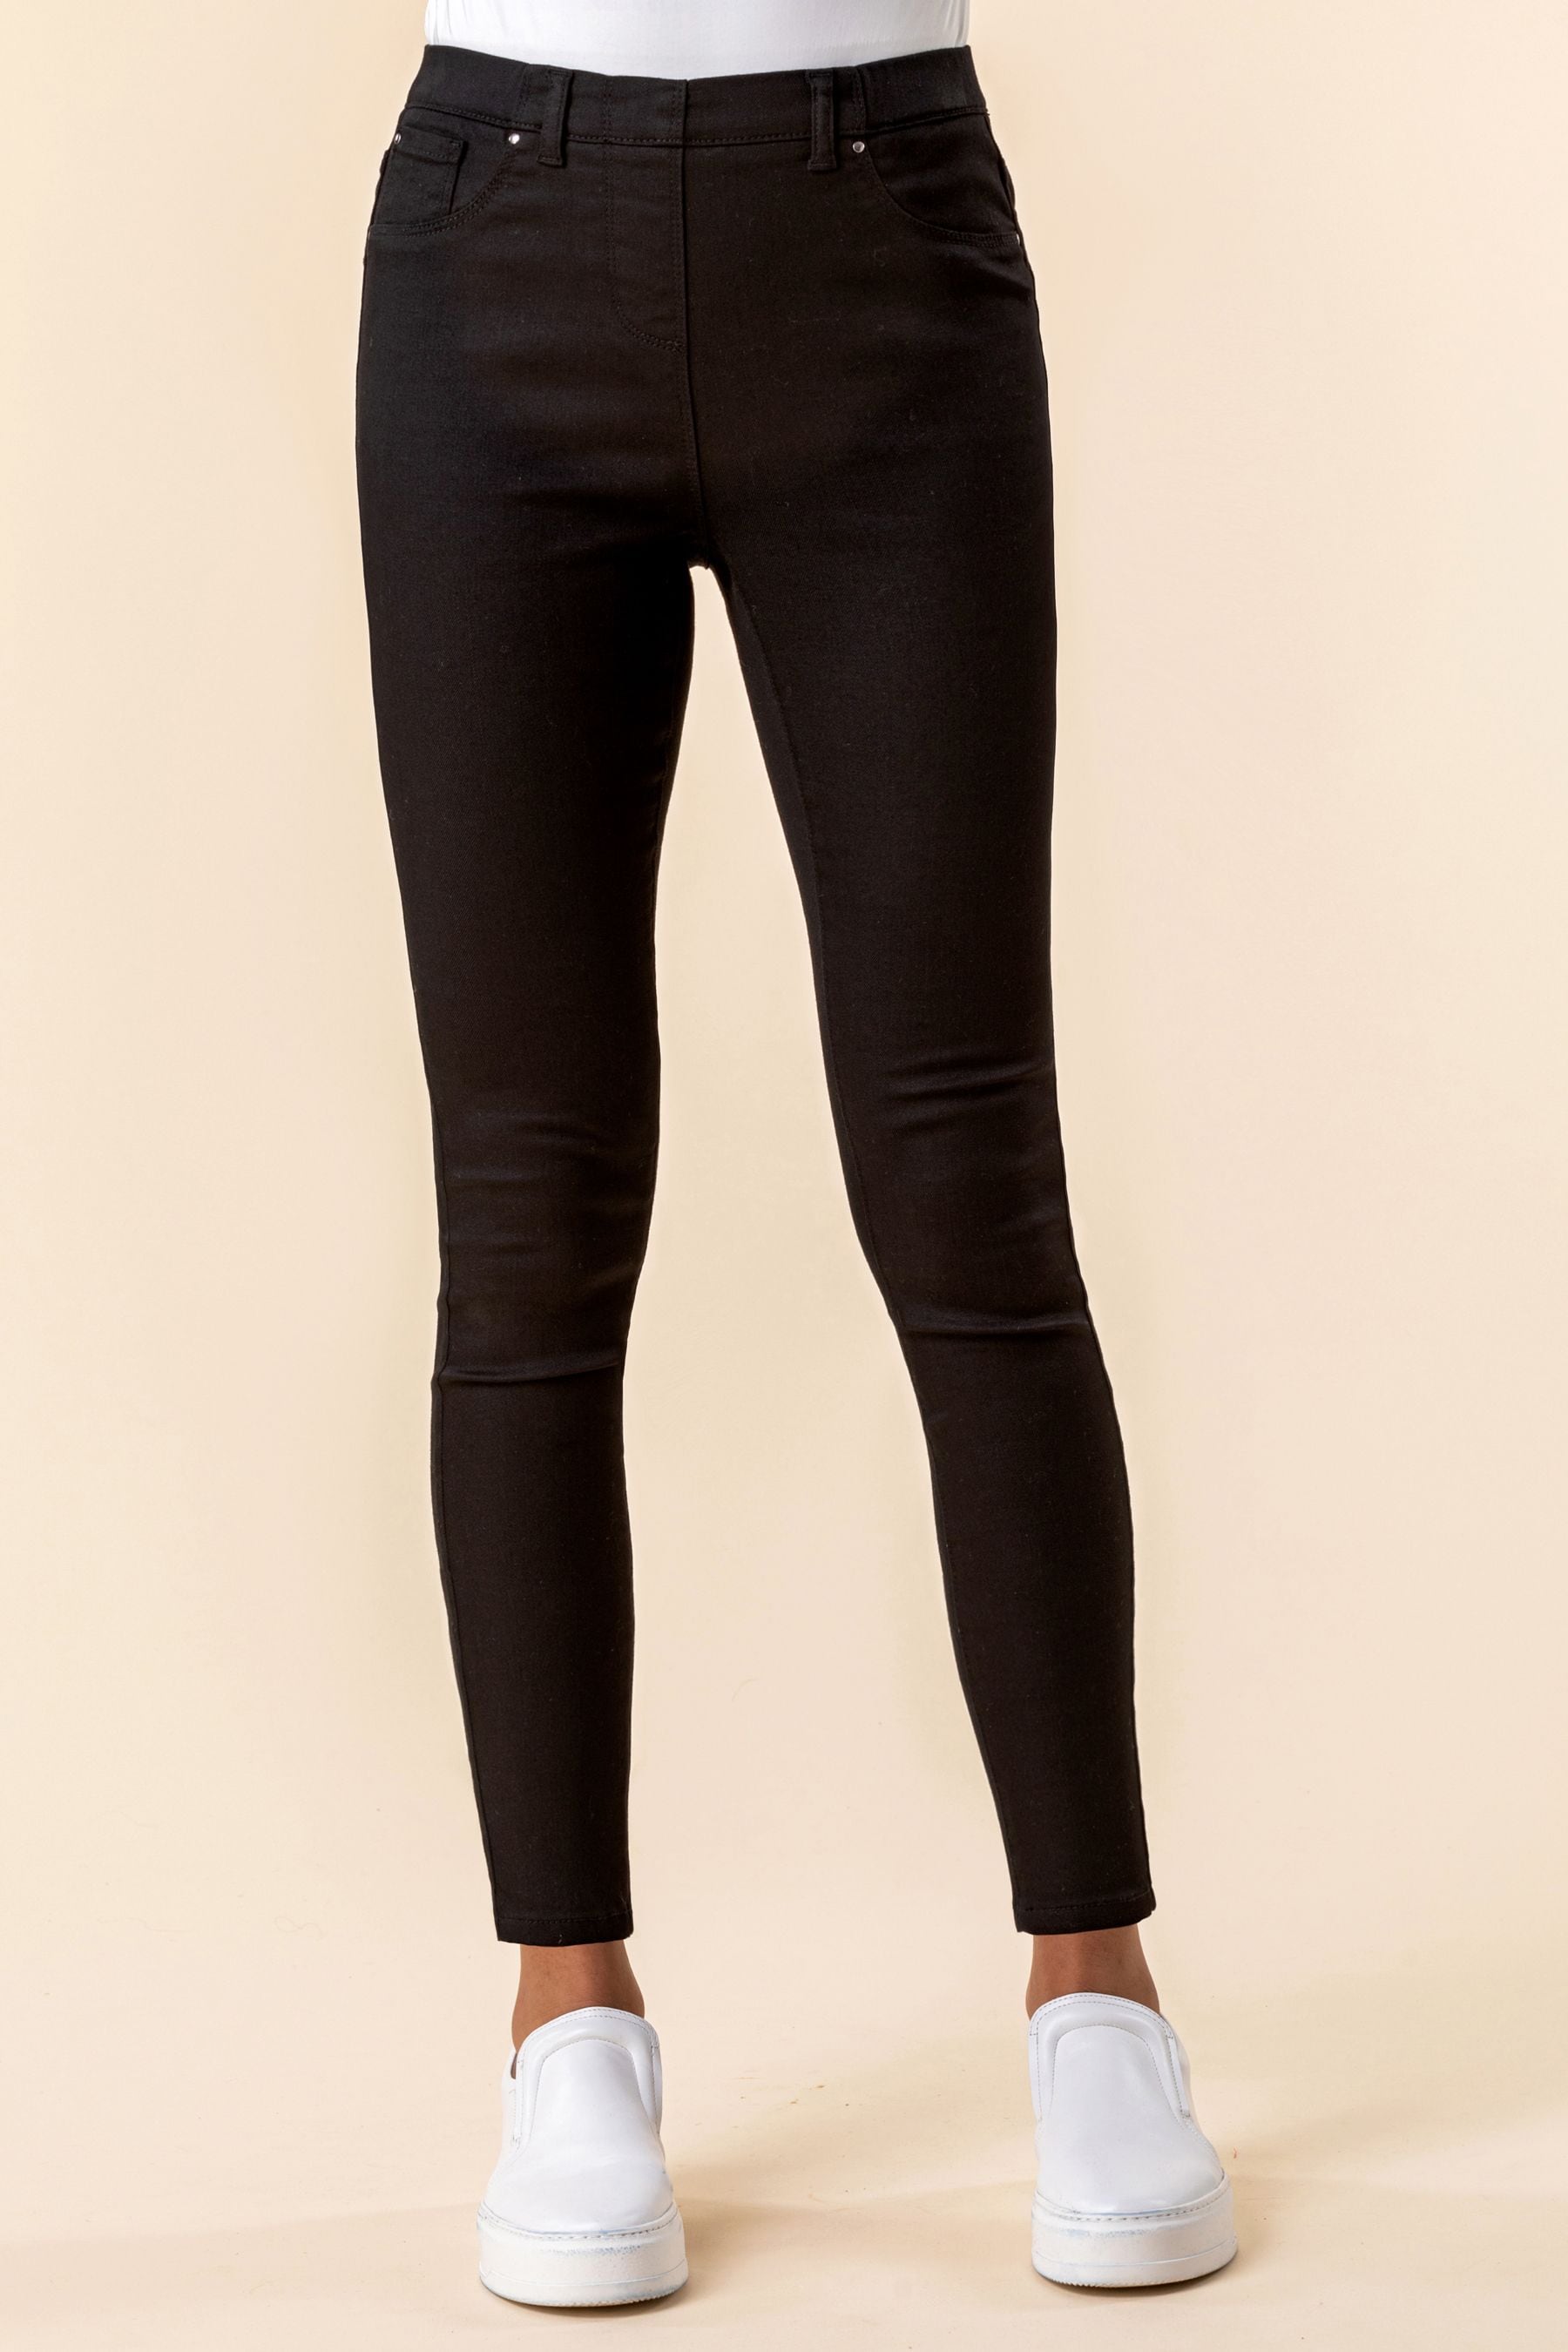 Buy Roman Black Ultimate Stretch Jegging from the Next UK online shop